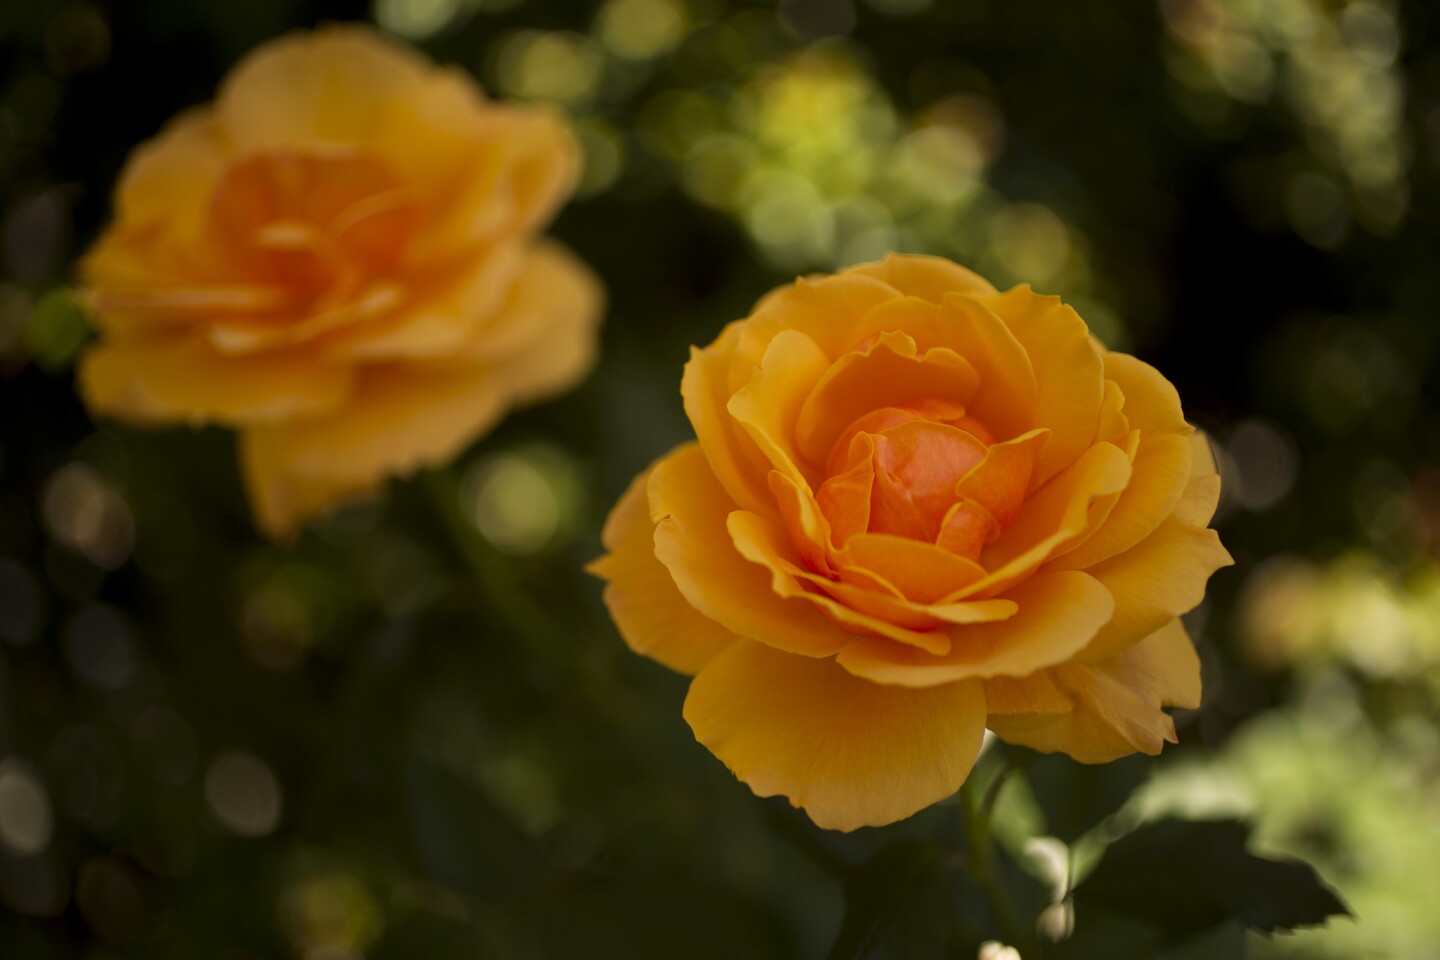 An "About Face" grandiflora rose in the garden of Windsor Square homeowner Kathleen Losey.